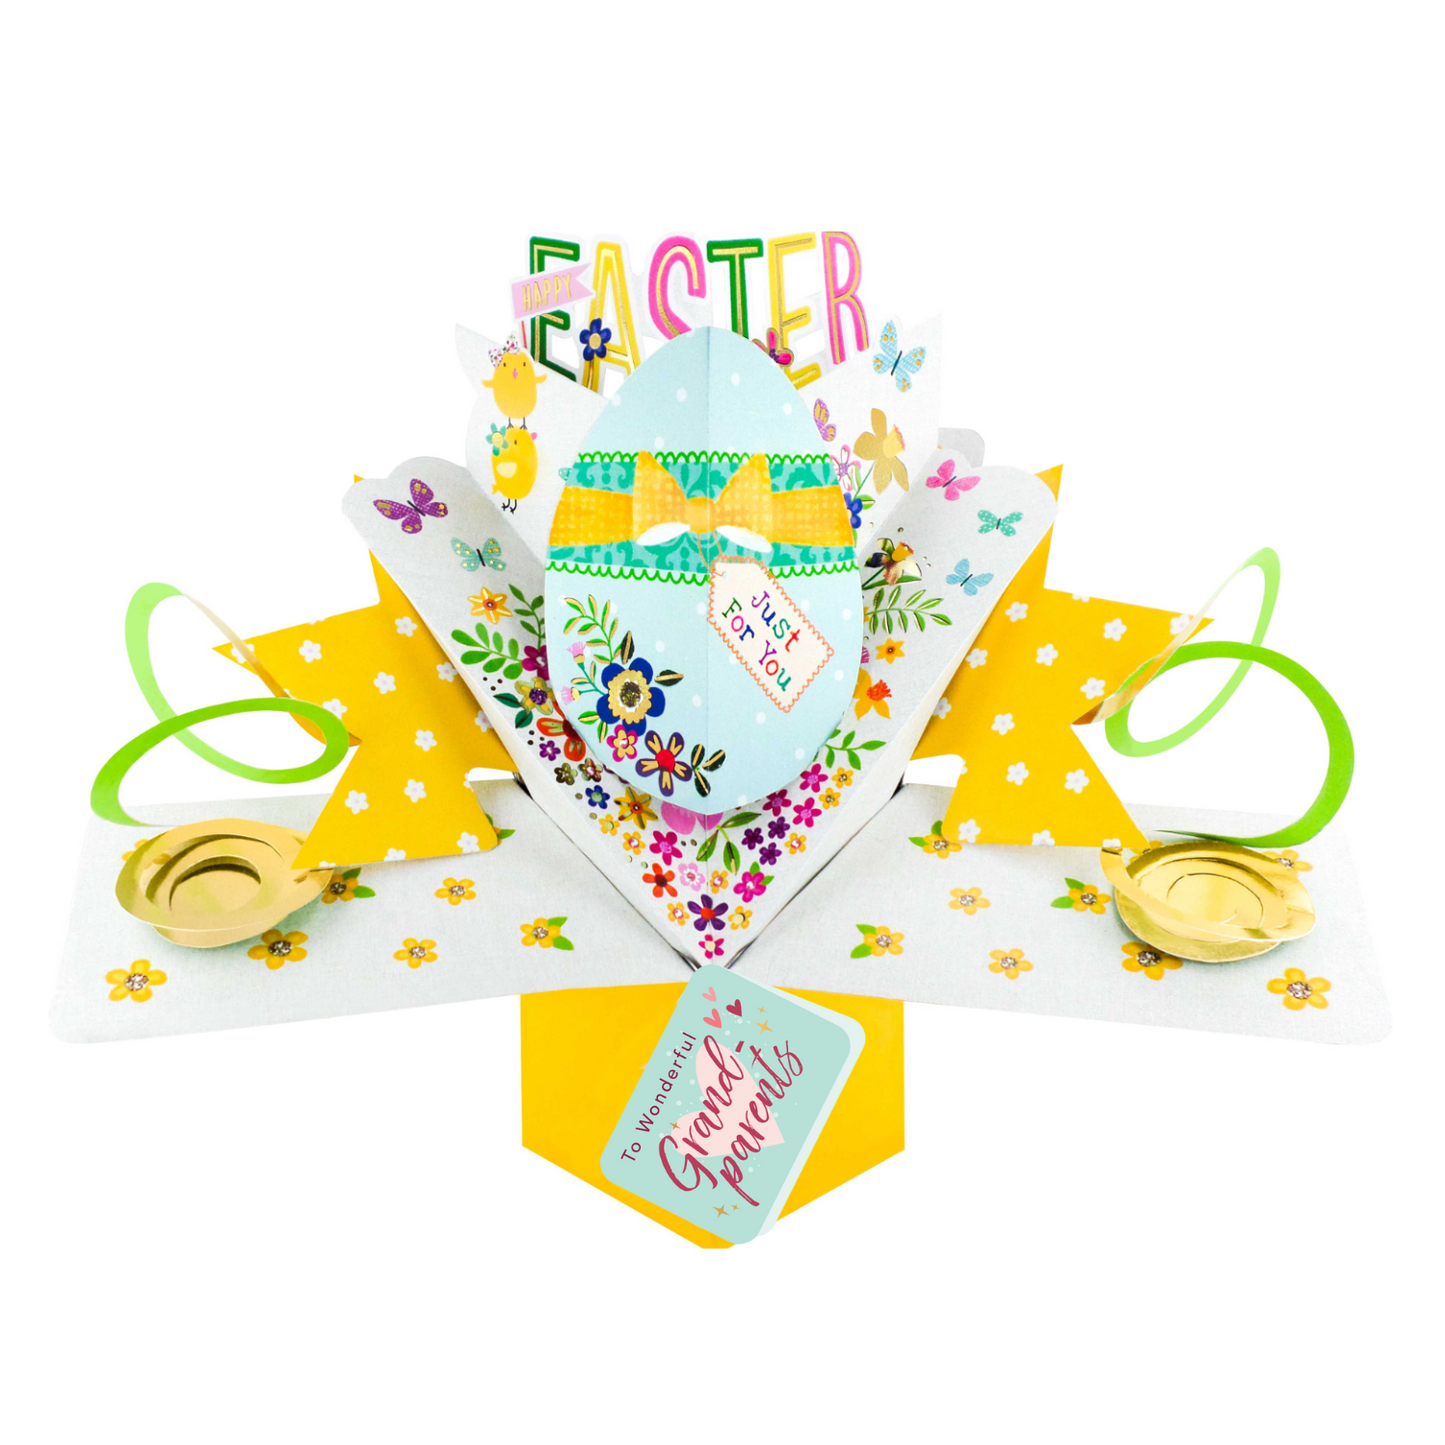 To Wonderful Grand-parents Happy Easter Decorated Egg Pop Up Easter Card